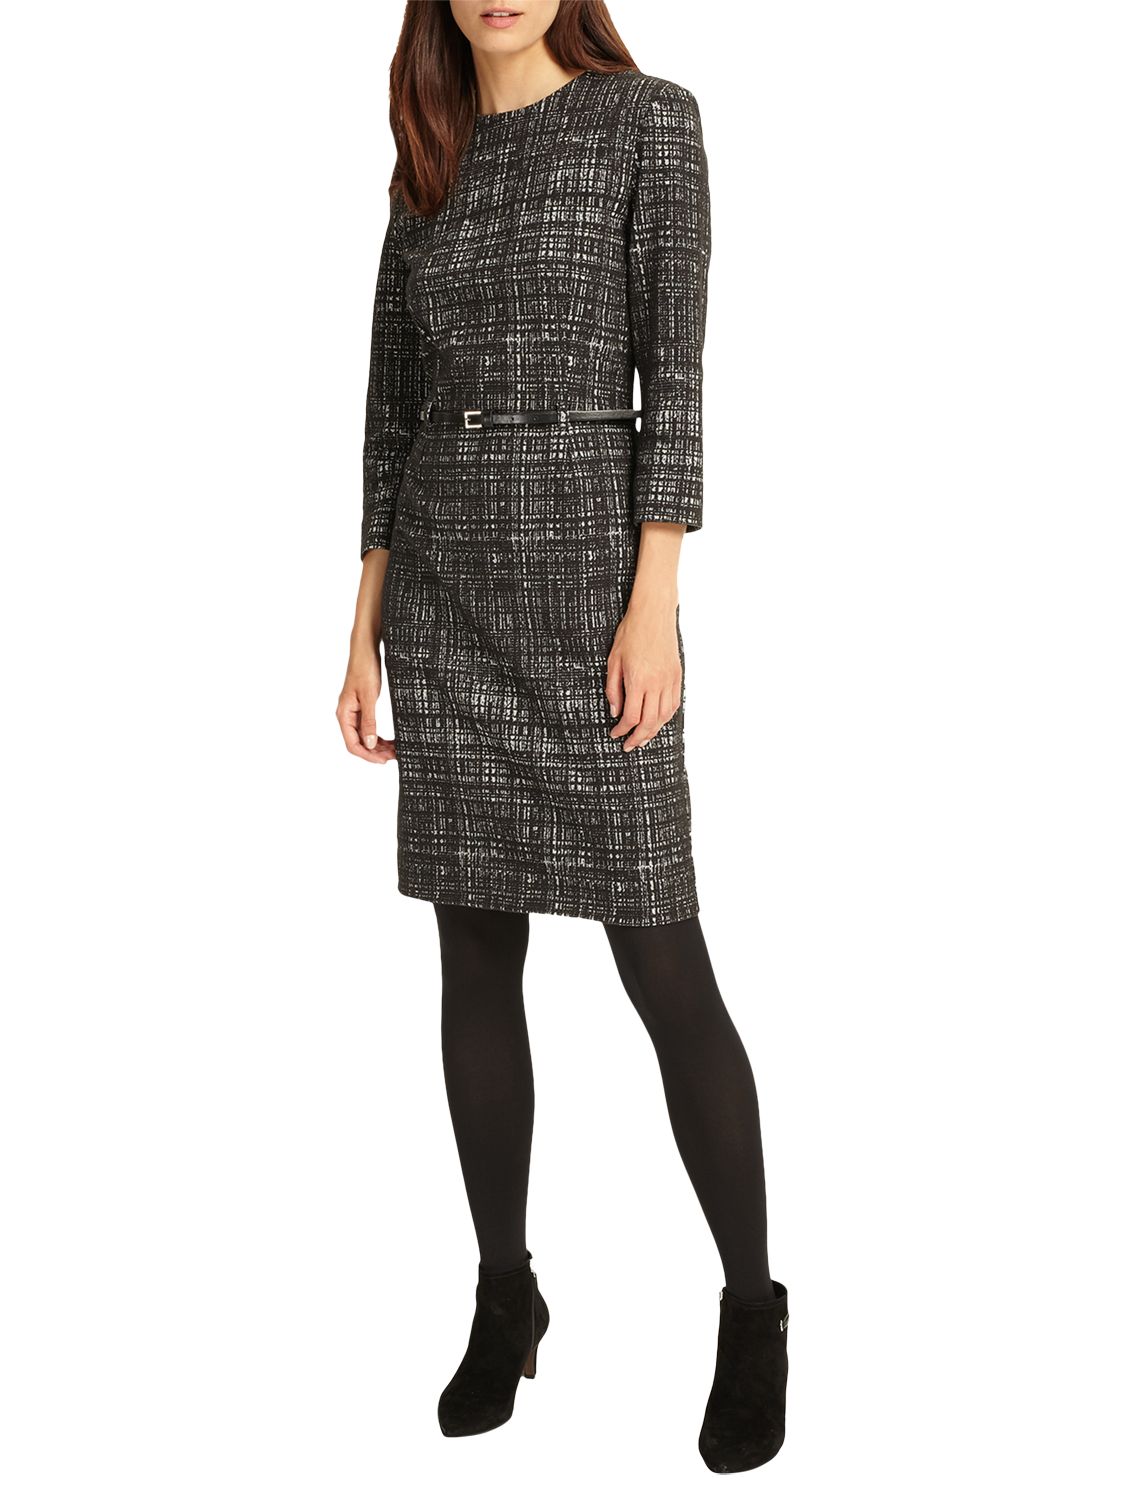 Phase Eight Tabatha Textured Dress, Charcoal